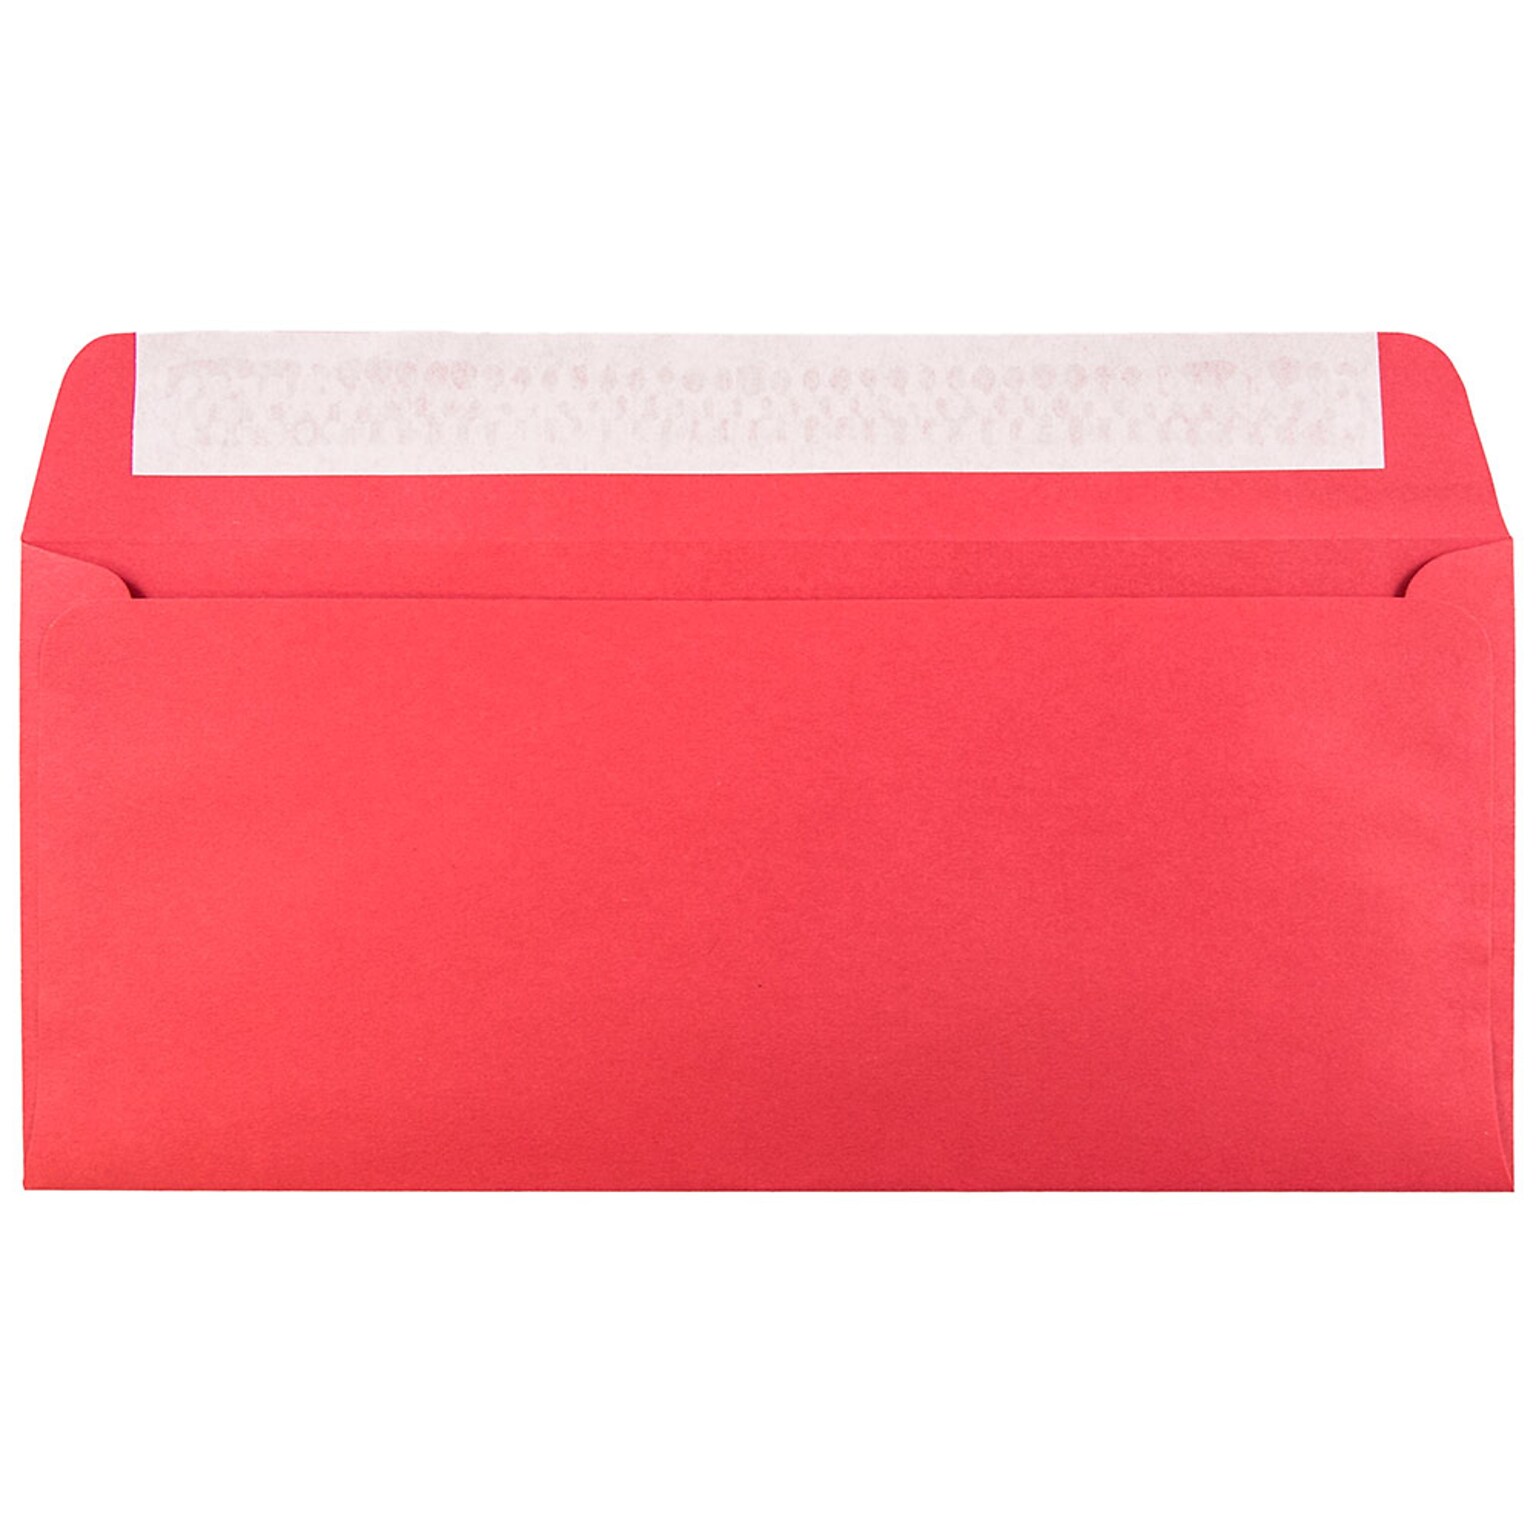 JAM Paper #10 Business Envelopes with Peel & Seal Closure, 4 1/8 x 9 1/2, Red Recycled, 100/Pack (11789D)